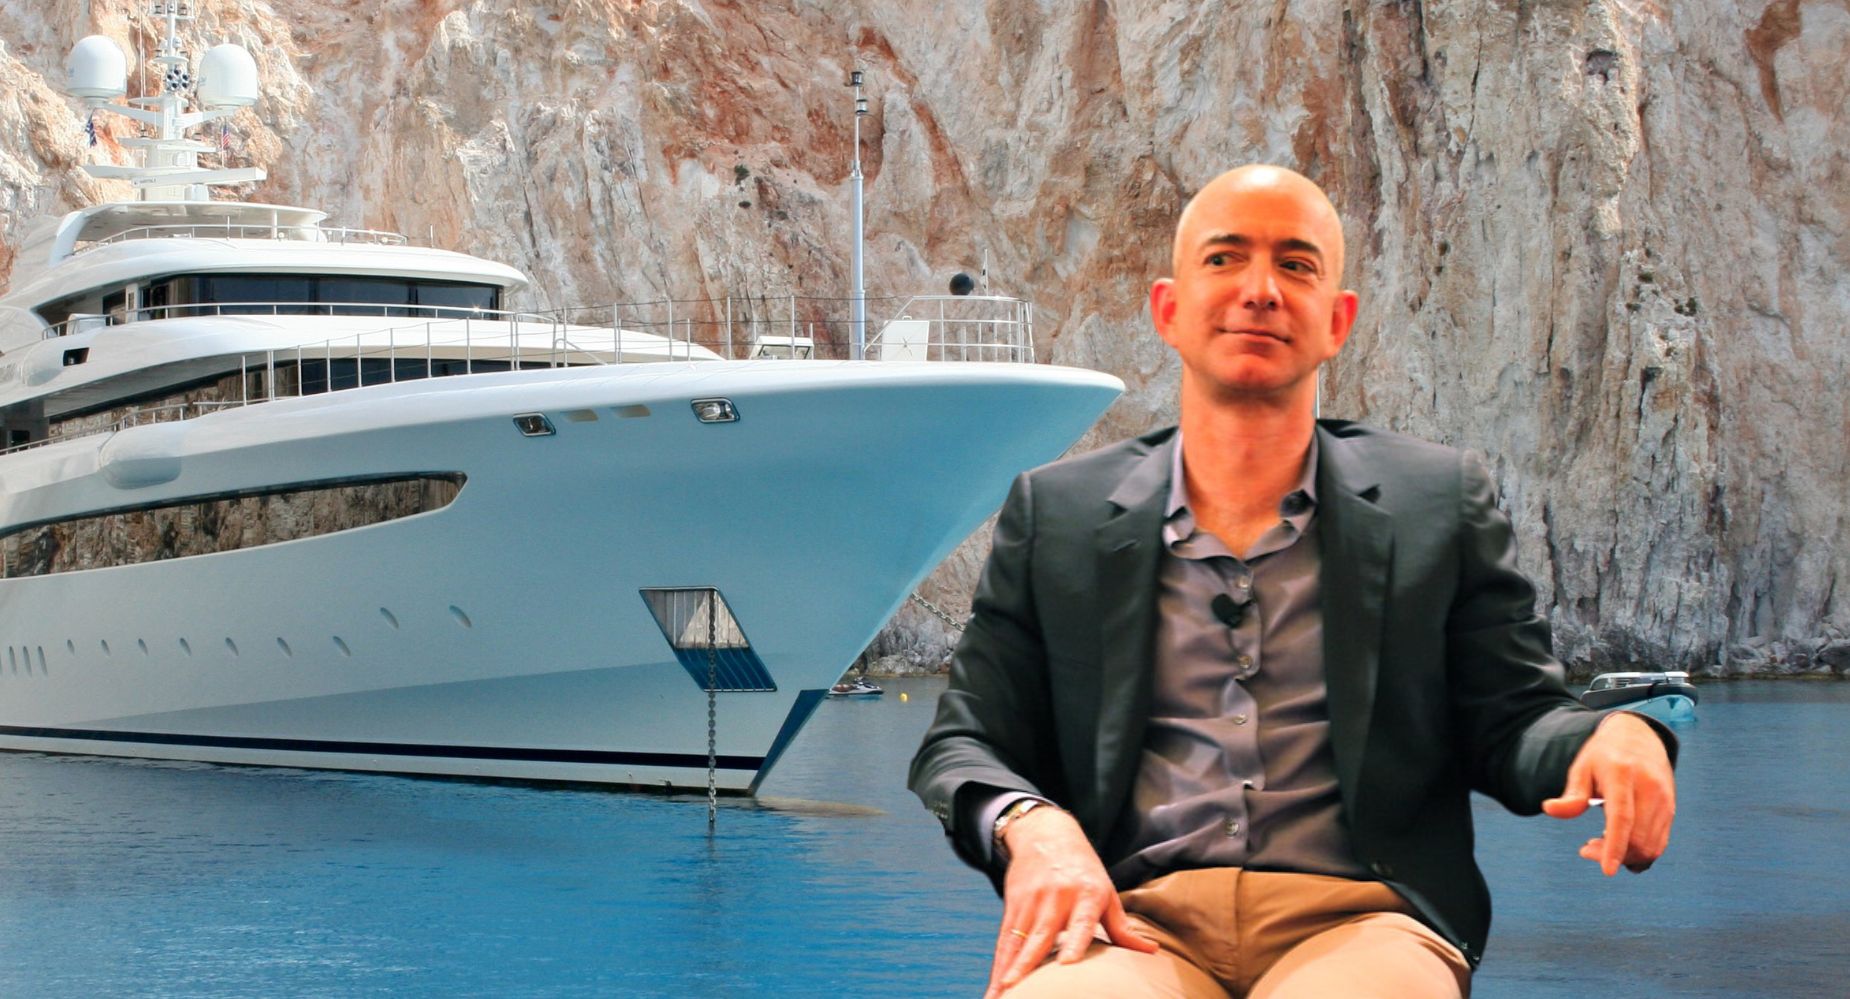 What to expect inside Jeff Bezos' superyacht — Hashtag Legend